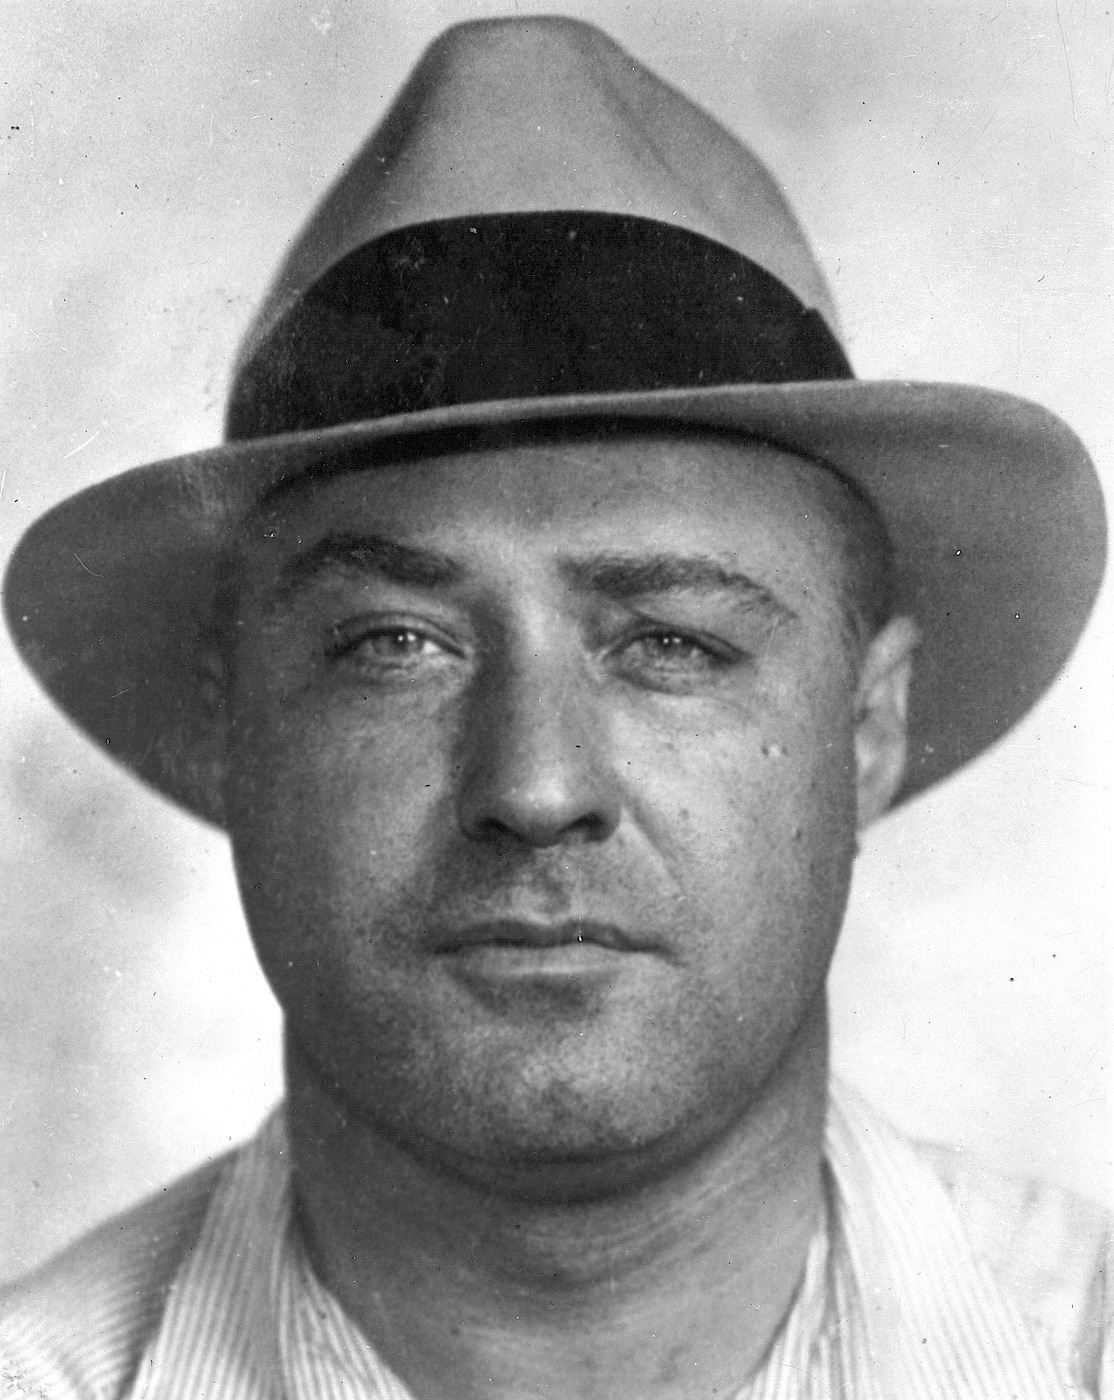 Mugshot of George "Machine Gun" Kelly (real name George Barnes), gangster and kidnapper who reportedly said "Don't shoot, G-men" when arrested in Memphis in 1933.